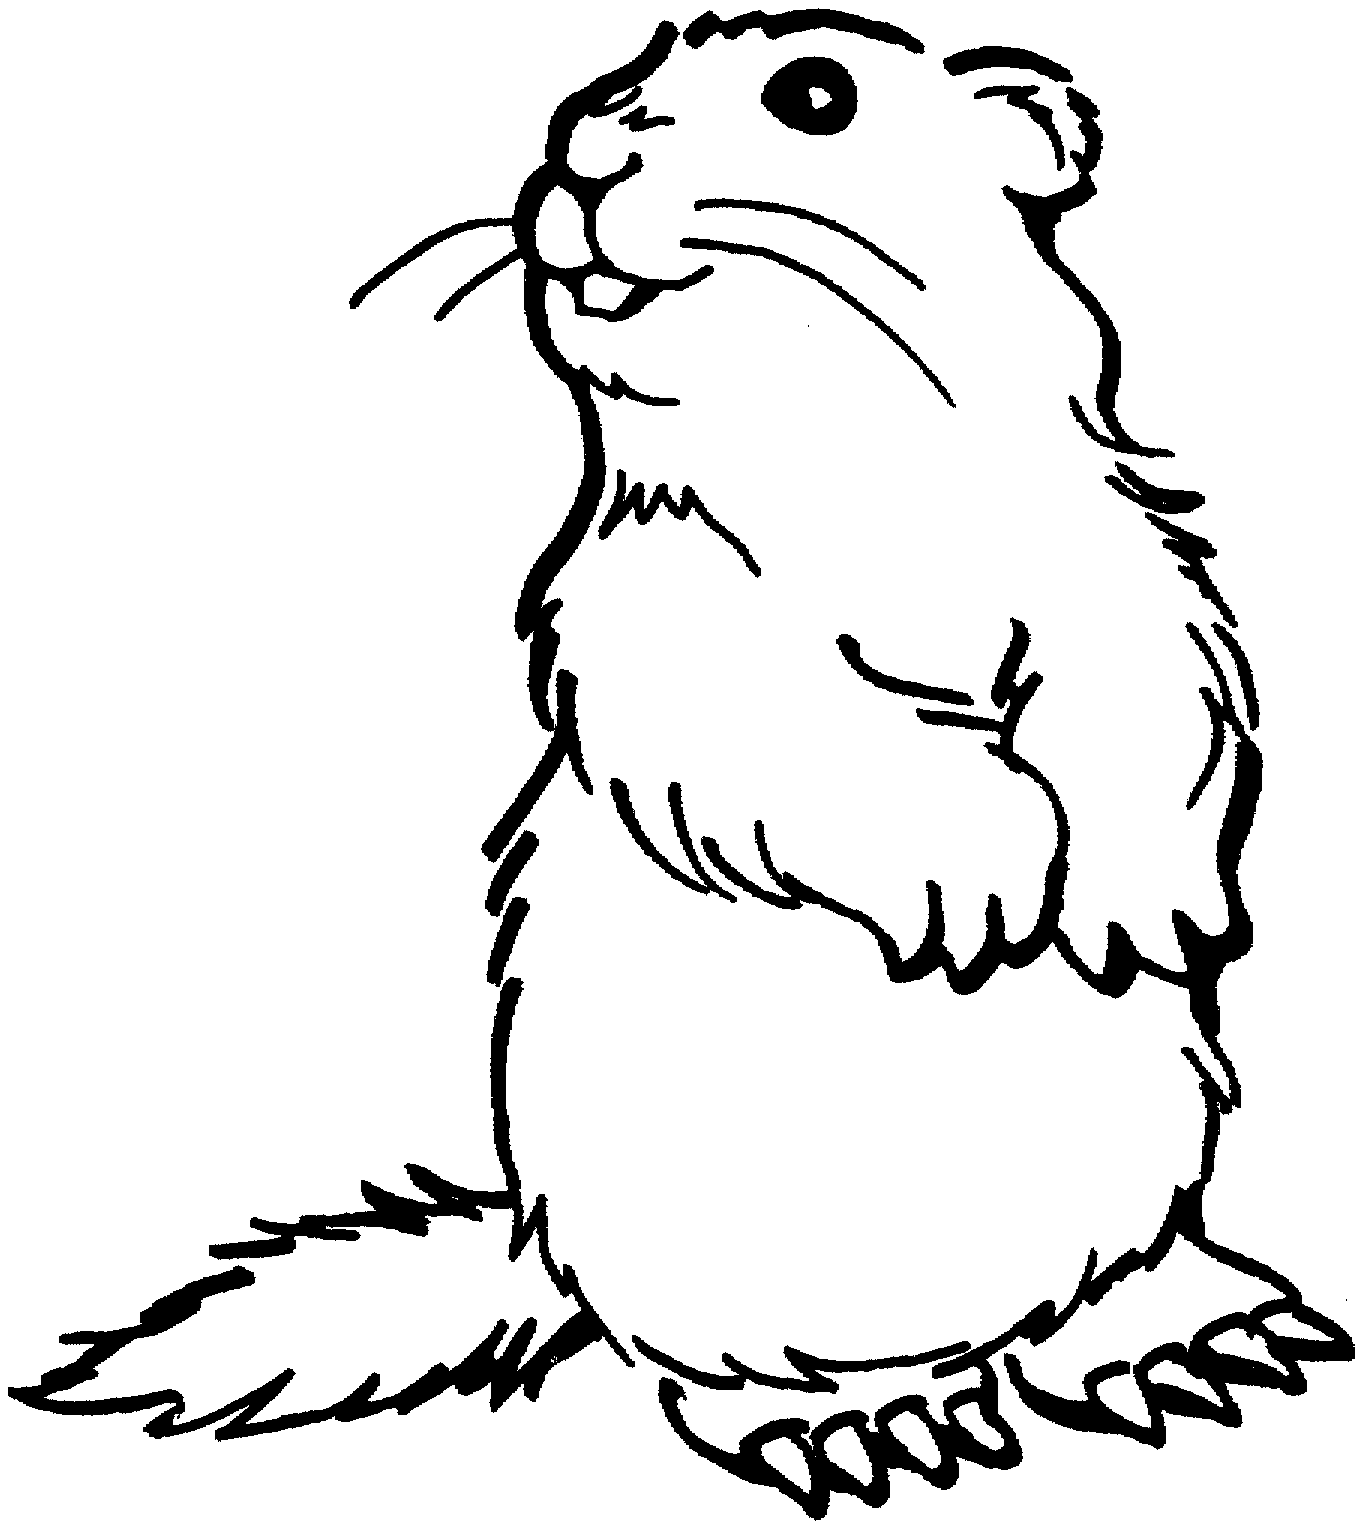 Prairie Dog clipart #12, Download drawings